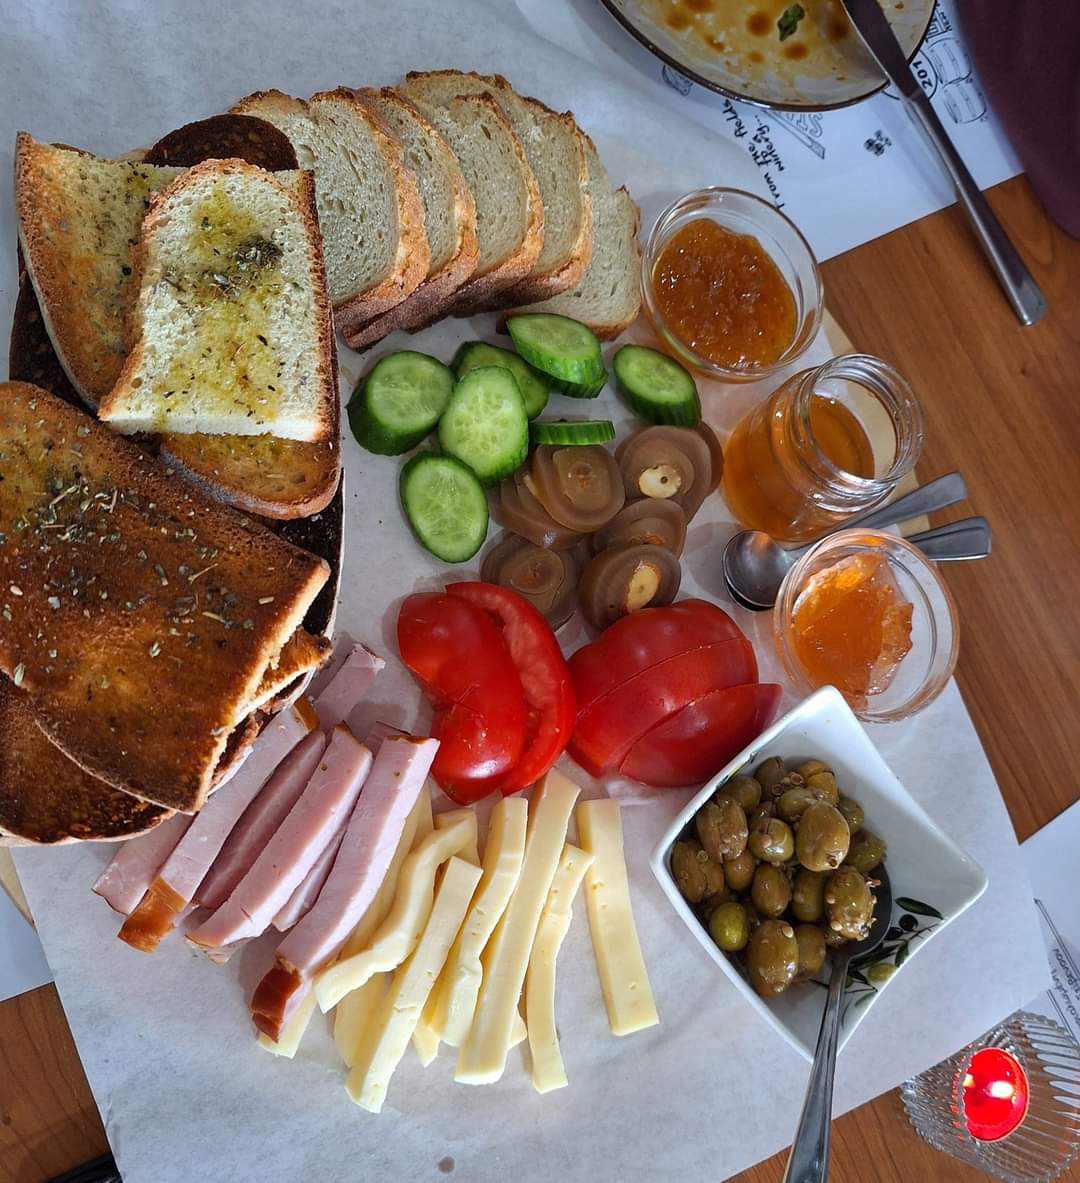 Hello everyone, this is how we brunch in Cyprus! 😍🇨🇾 #cypruspassion